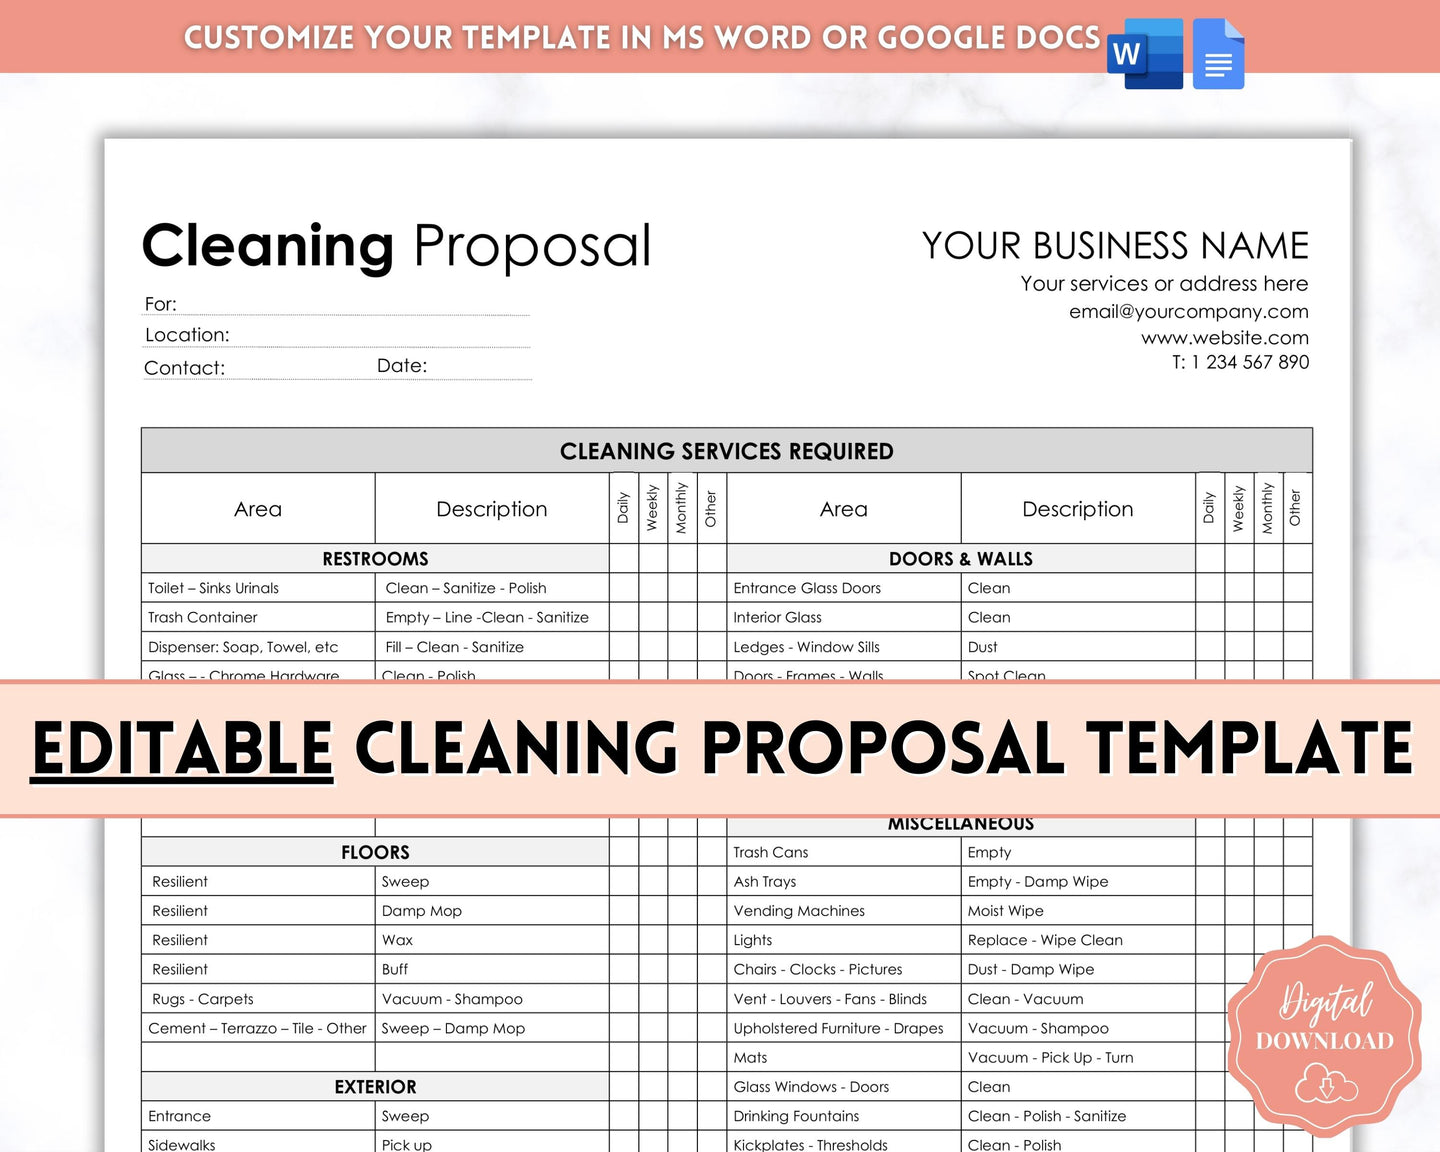 Cleaning Proposal & Commerical Cleaning Estimate Template | Editable Commercial Cleaning Services Template